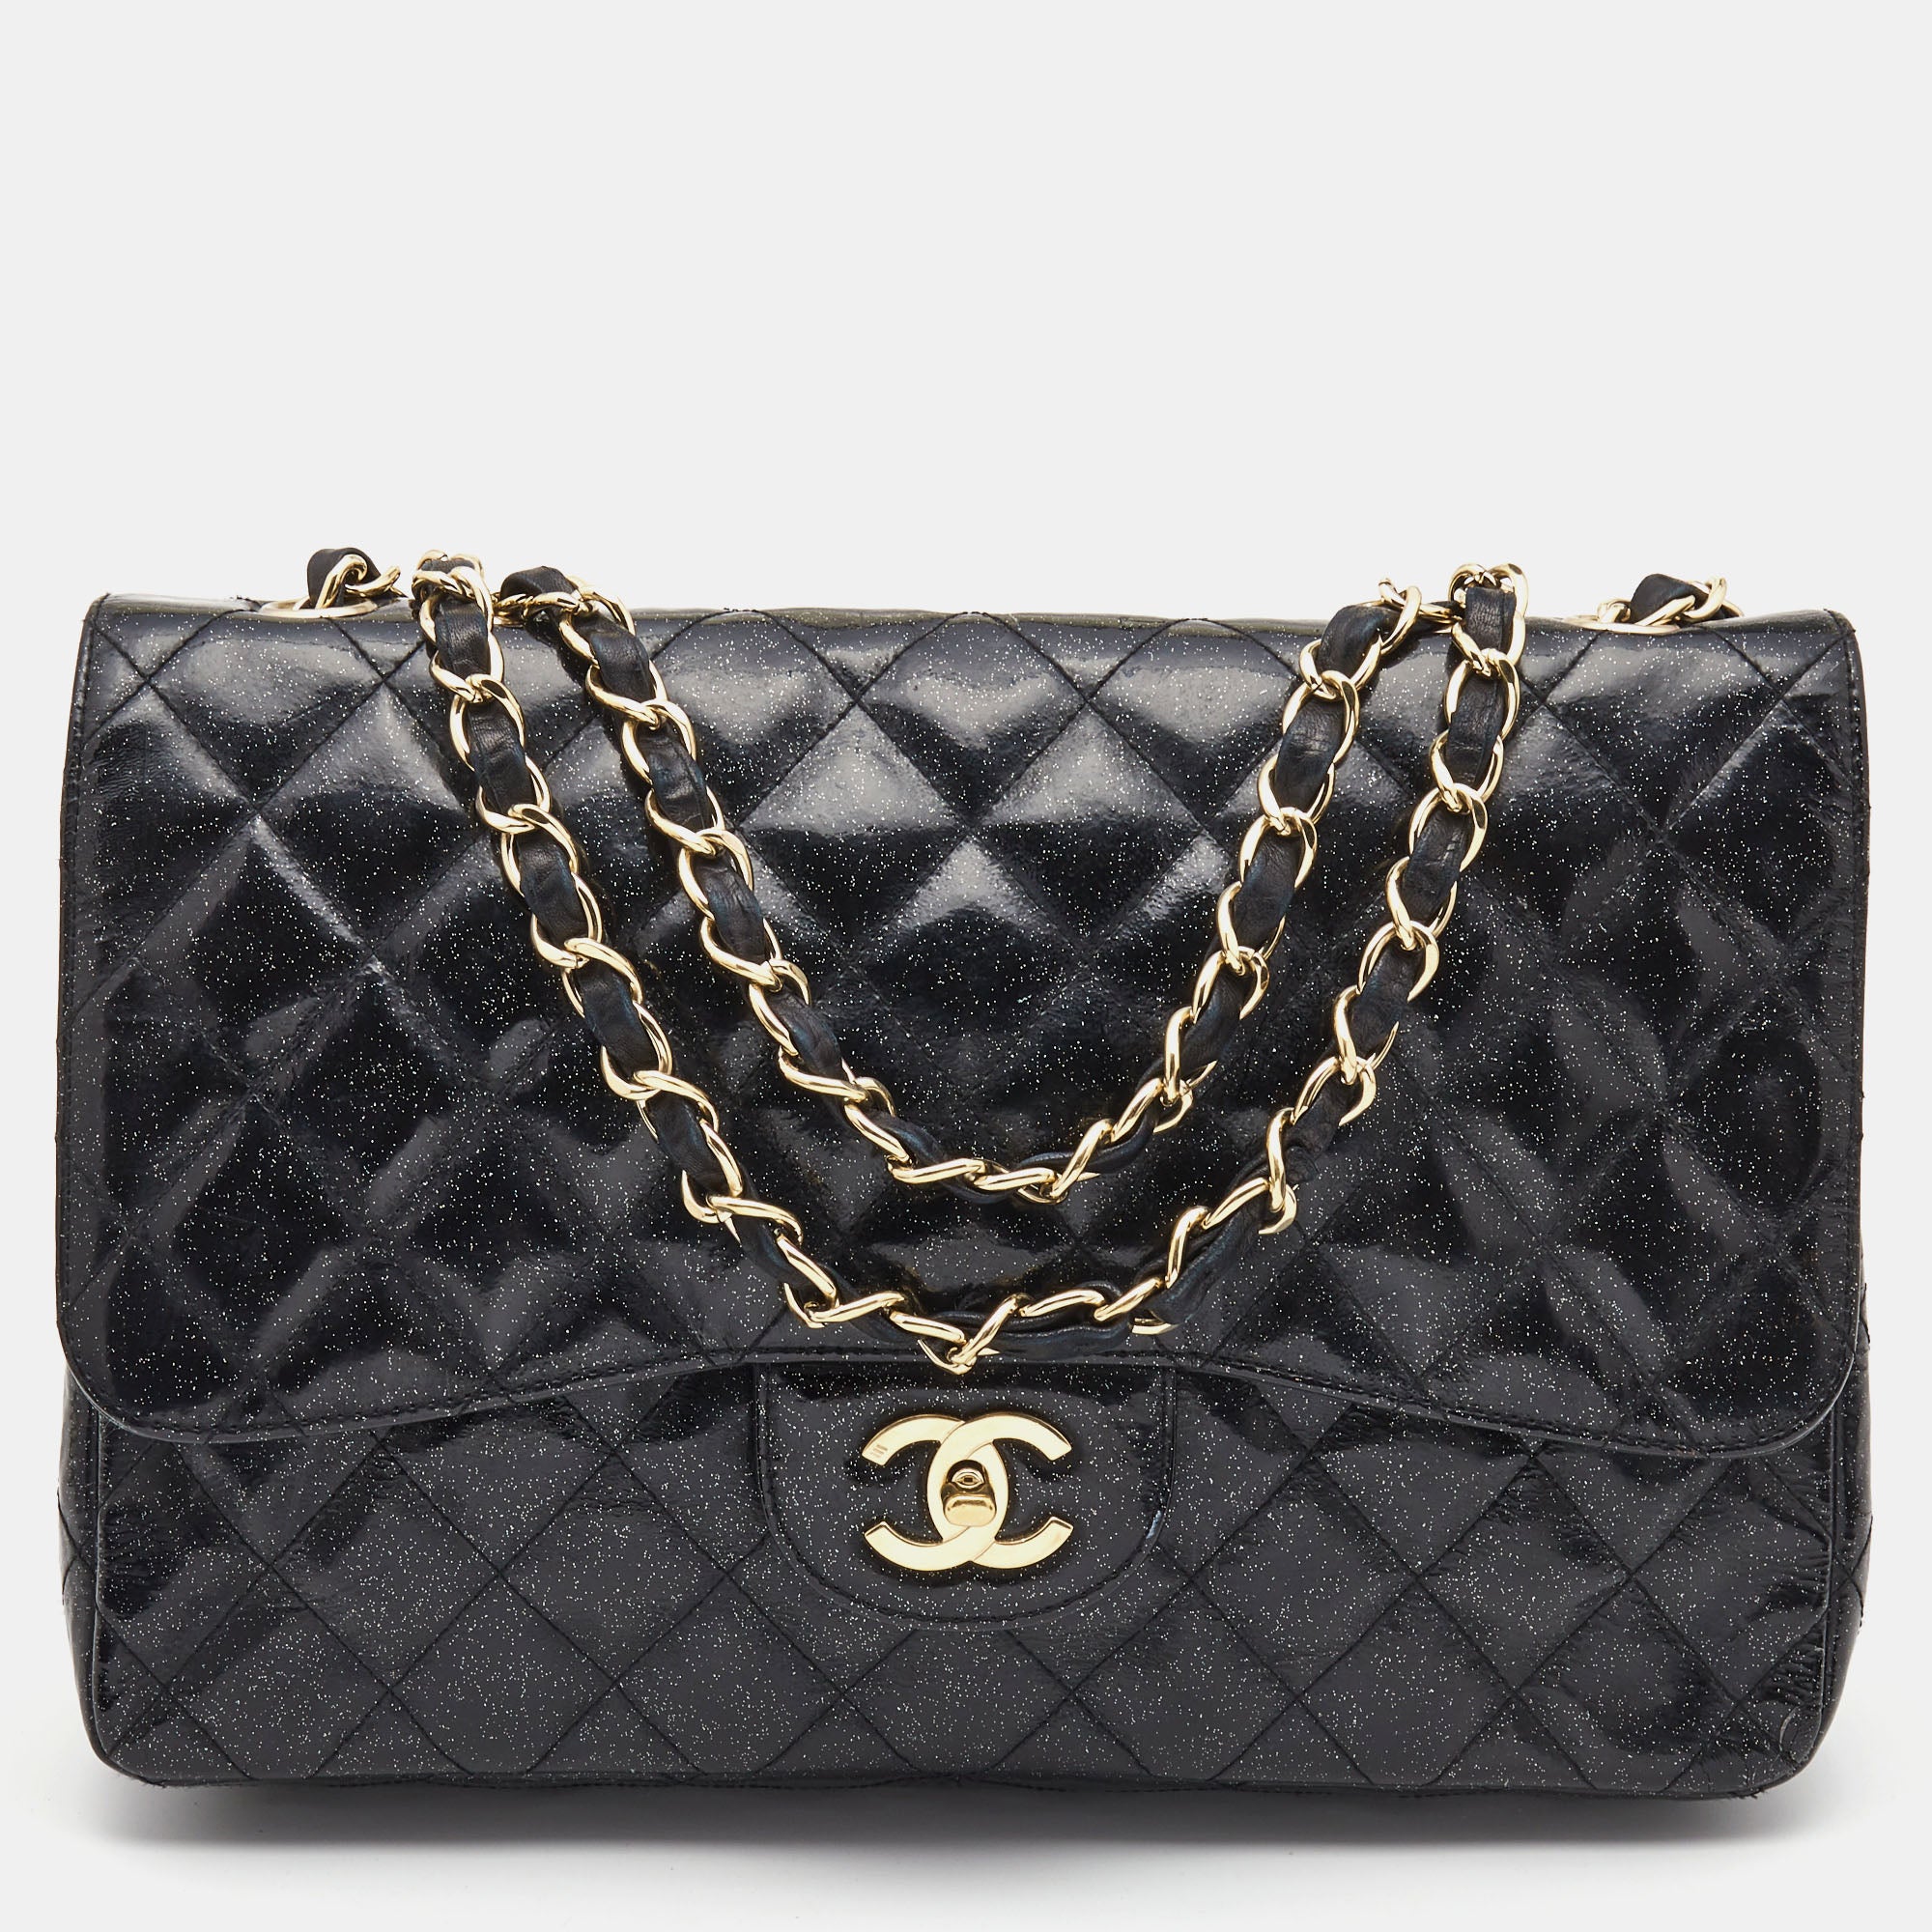 CHANEL Black Quilted Leather Maxi Classic Double Flap Bag